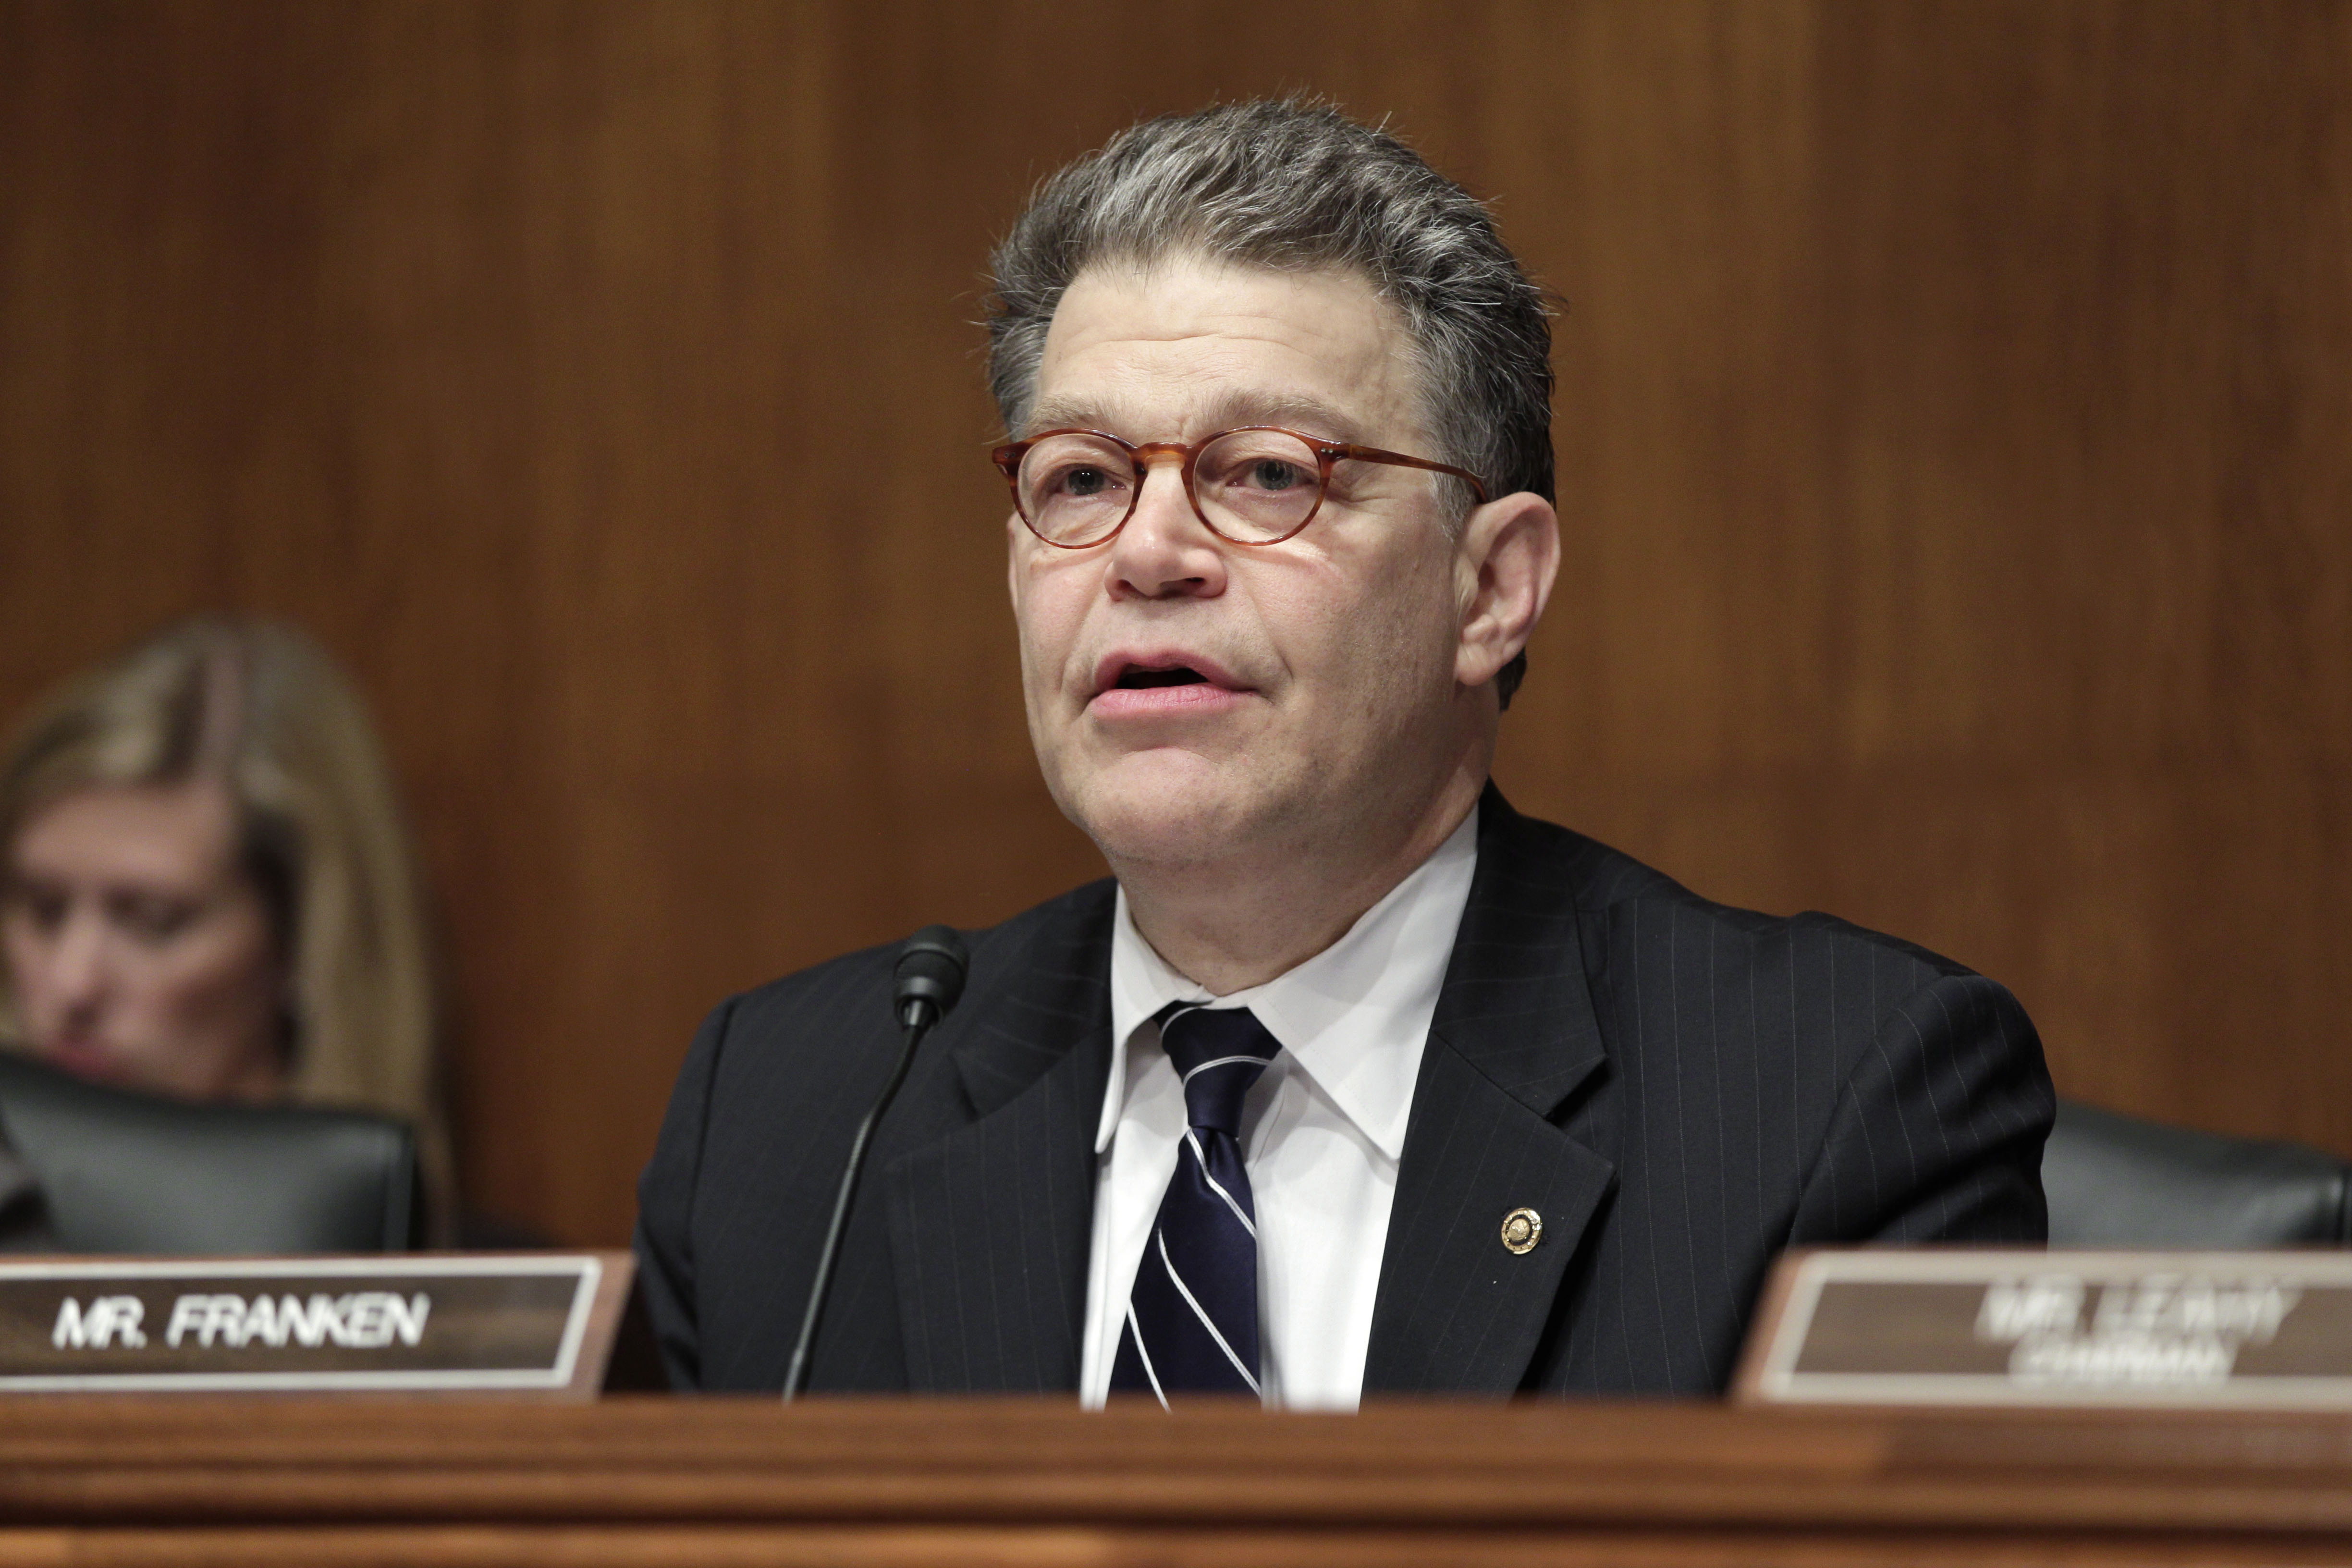 In this May 10, 2011, file photo, Senate Privacy, Technology and the Law subcommittee Chairman Sen. Al Franken, D-Minn. presides over the subcommittee's hearing on 